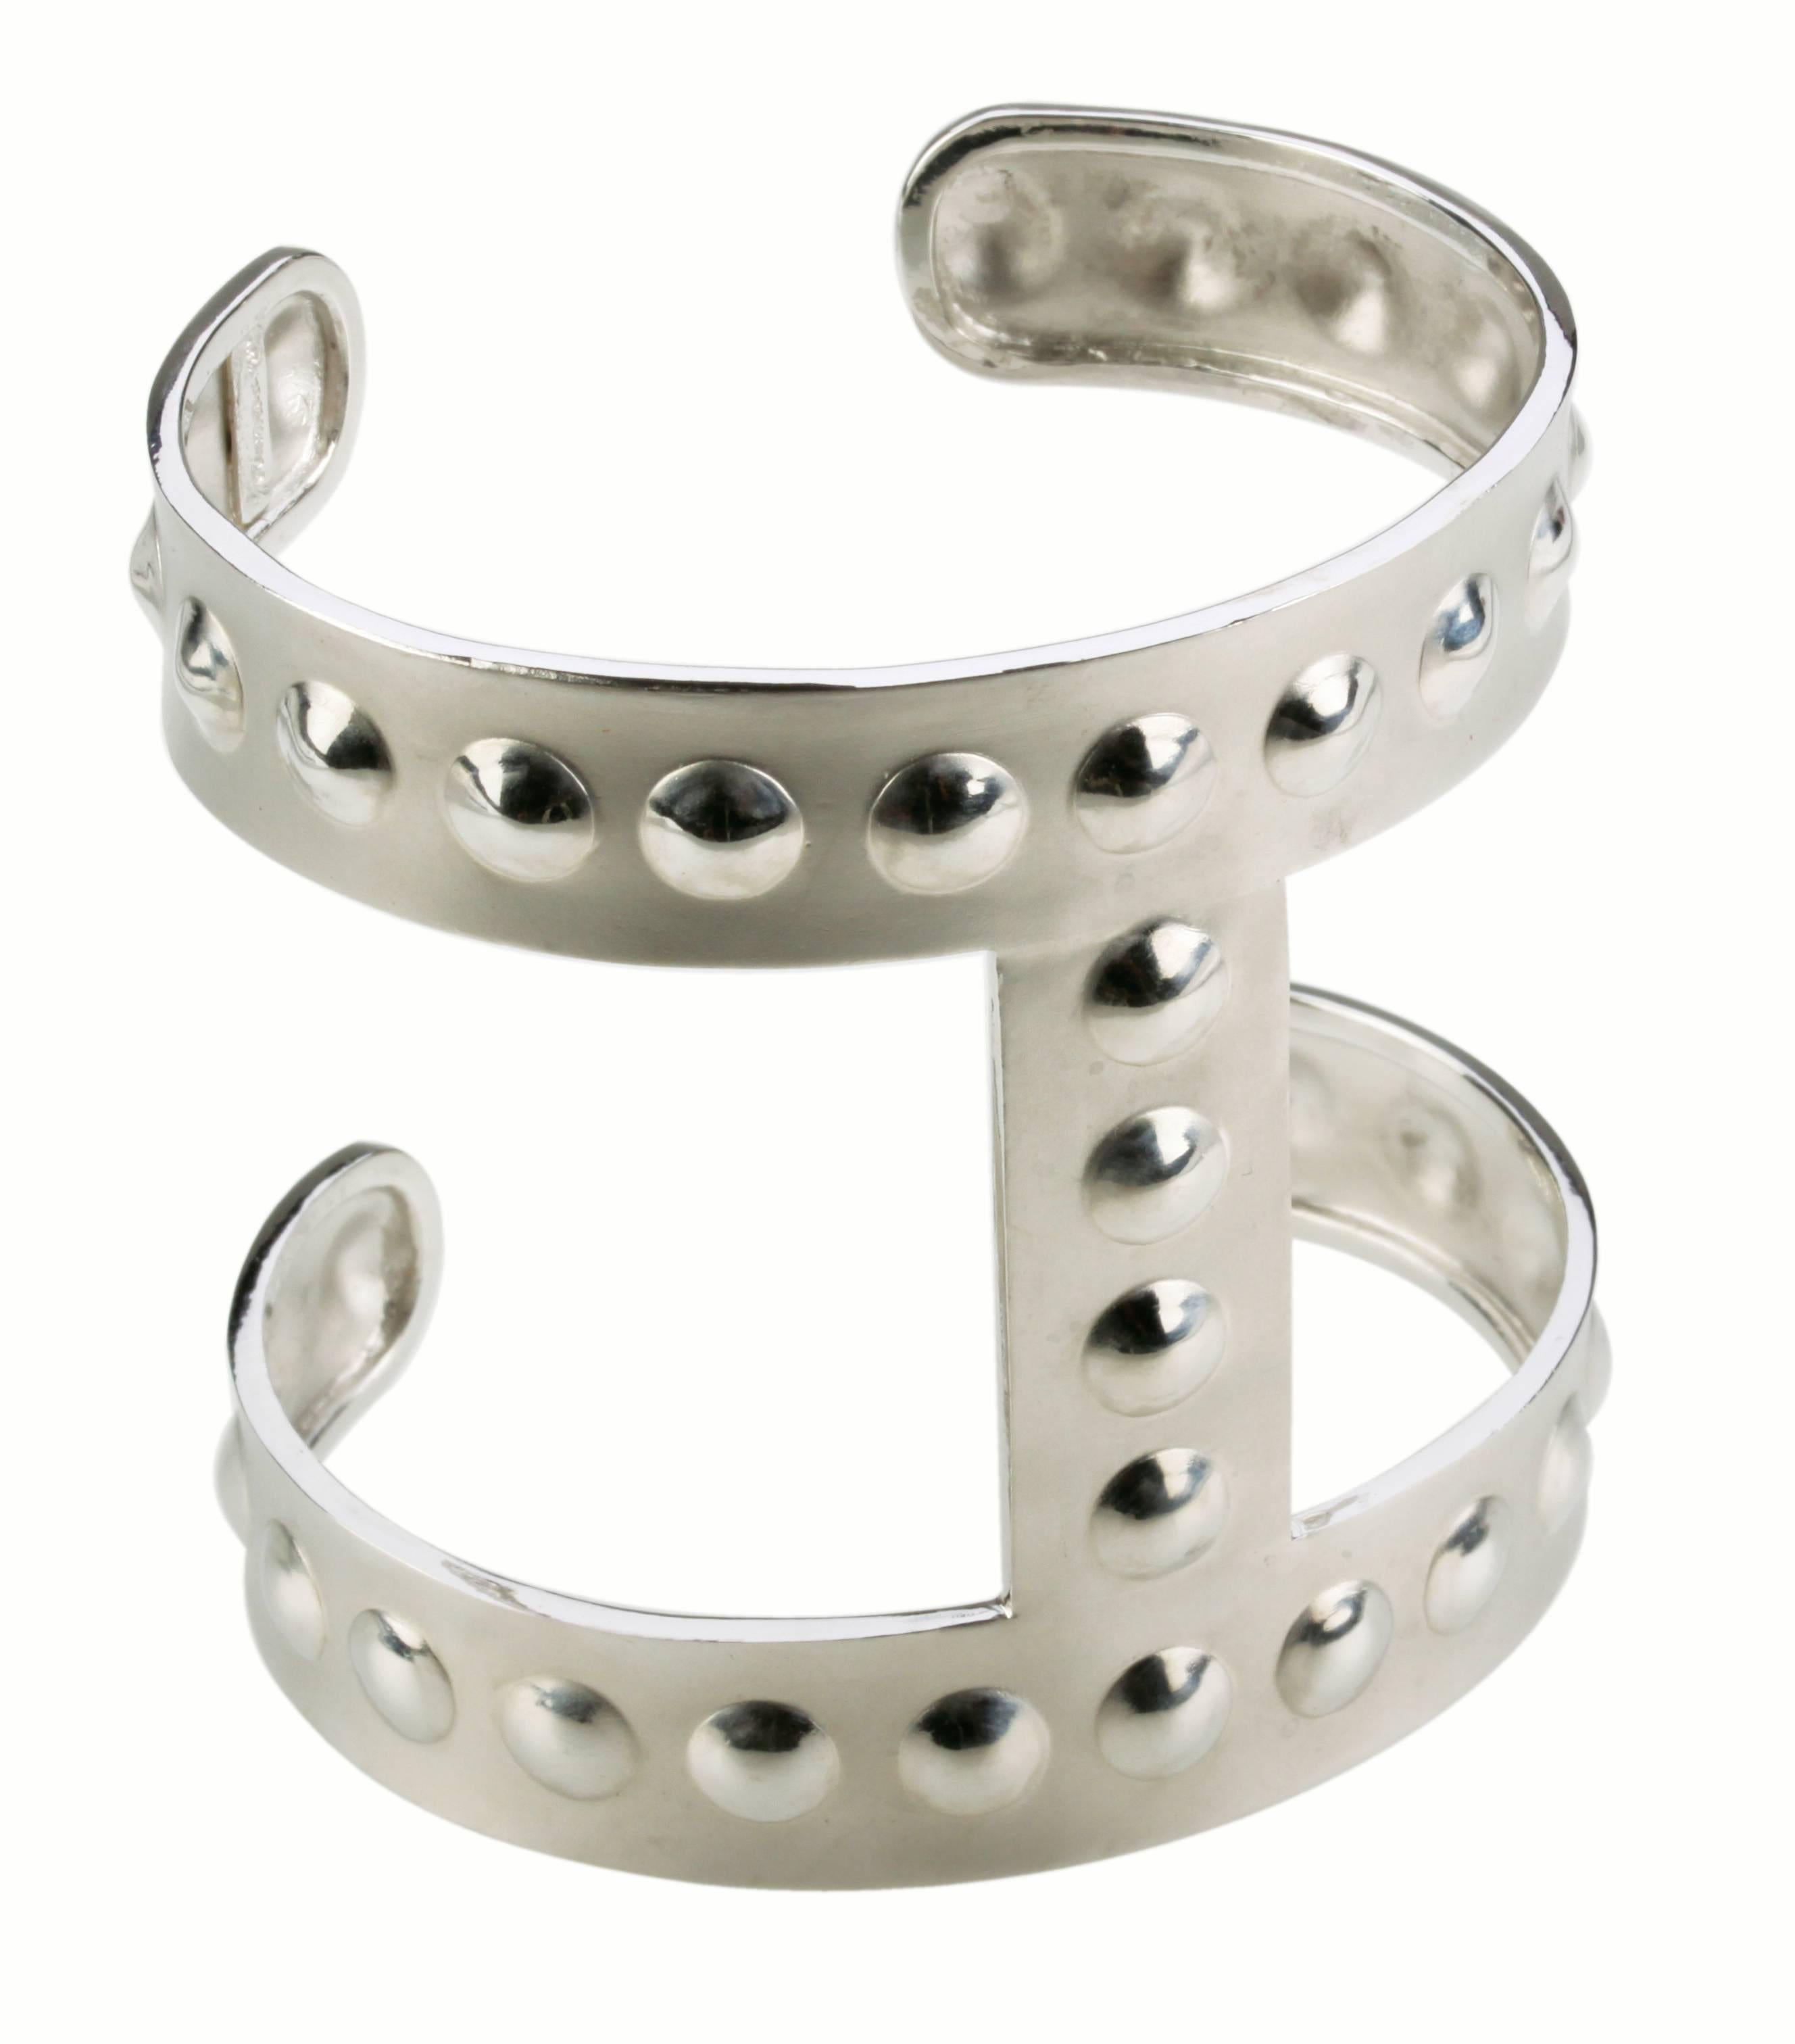 Metal: 18K White Gold
Wrist Size: 6.5”
Cuff Length: approximately 2”
Please allow for slight variations in measurements as pieces are handmade.
 
GLADIATOR COLLECTION © 2002
Youmna’s Gladiator Bubble Cuff in her distinctive matte 18K white gold